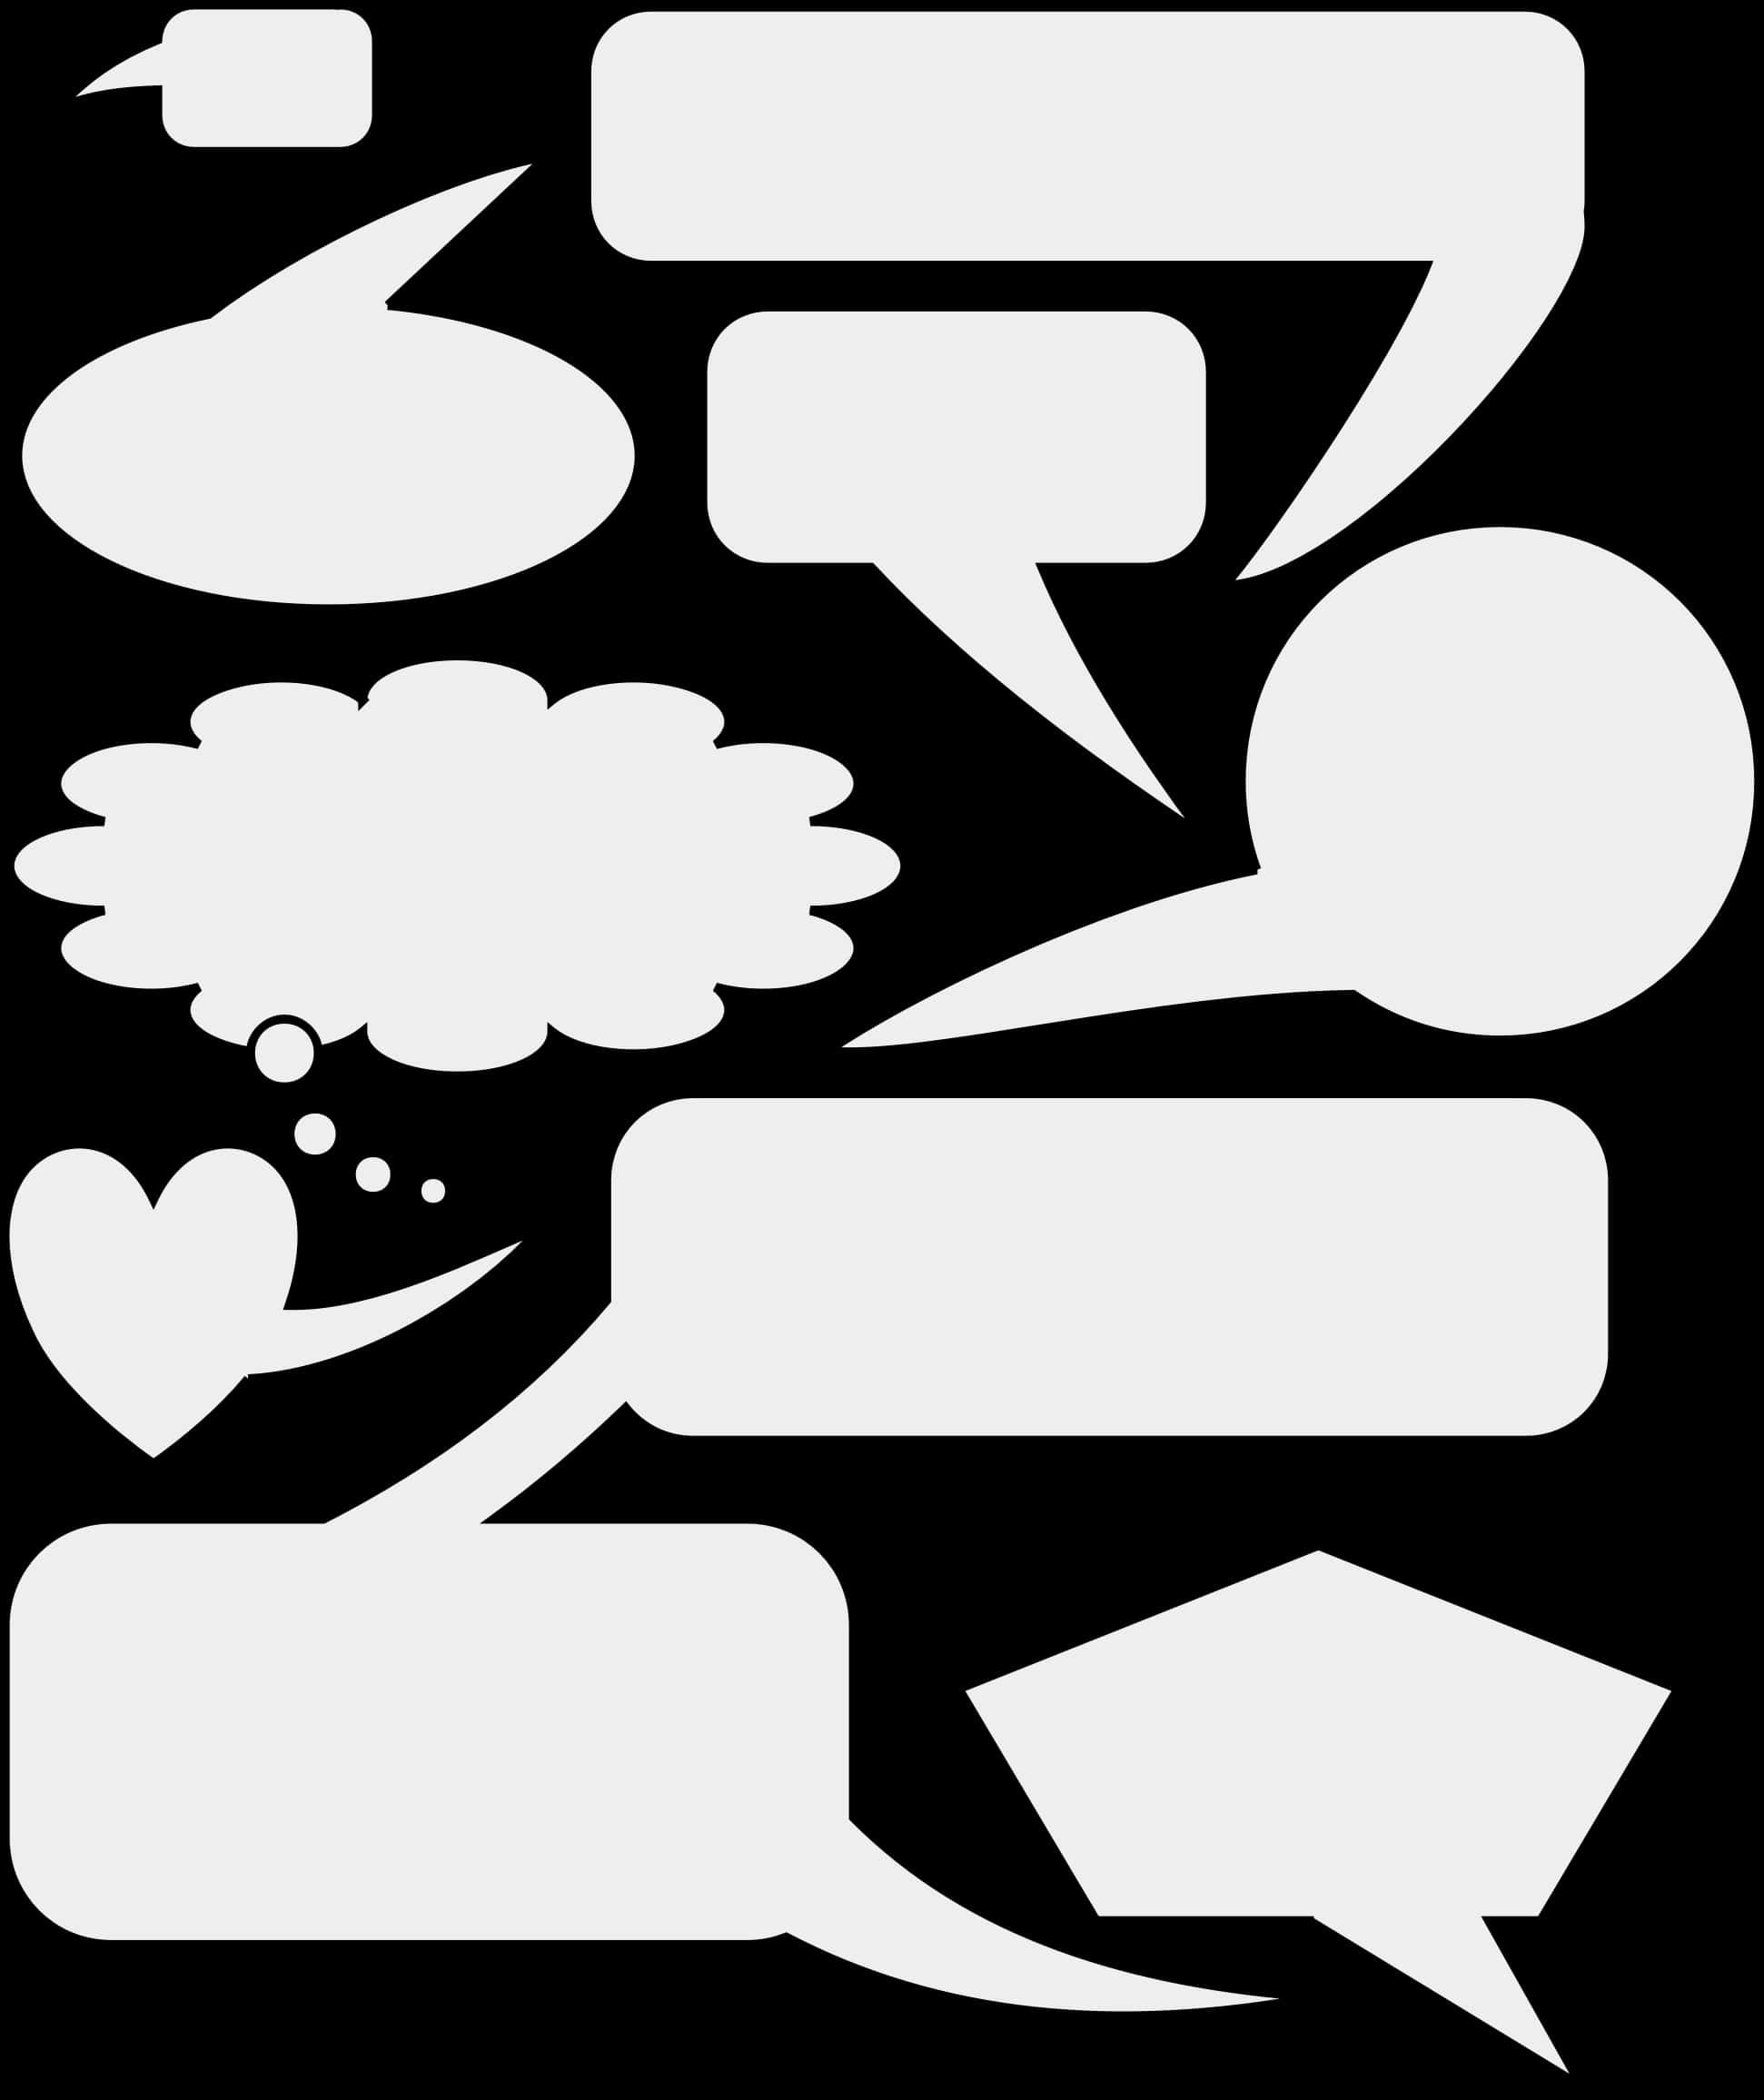 Varietyof Speech Bubbles Vector PNG image